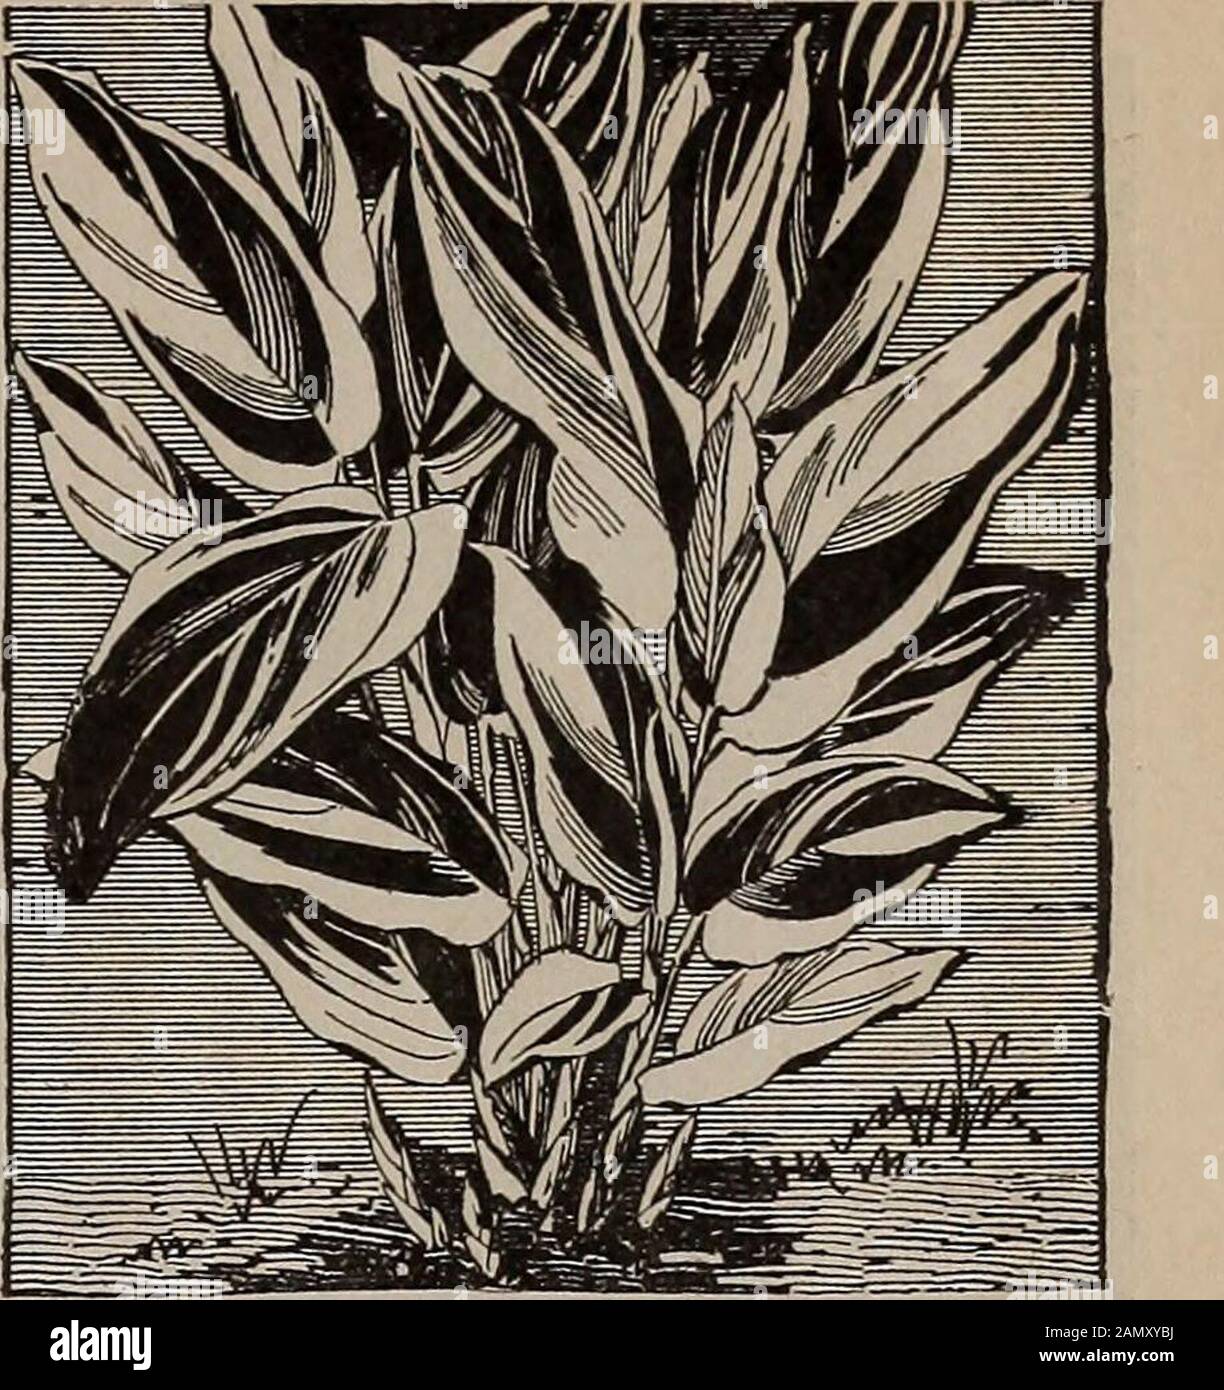 W.WRawson & Coseedsmen / W.WRawson & Co. . a tuber, and may be wintereddry — like a Gladiolus — if desired, or it may be kept growing the year around as apot plant. The Canna-like shoots grow from a foot or 18 inches to 3 feet high, andthe leaves, which are spreading blades of oblong-lanceolate form, are from 6 to 10inches long and 2 to 5 inches broad. They are bright pale green, beautifullyvariegated with pure white and rich cream, the variegations being extremelydiversified; indeed it is almost impossible to find two leaves exactly alike. Insome leaves the whole area is pure white or rich cr Stock Photo